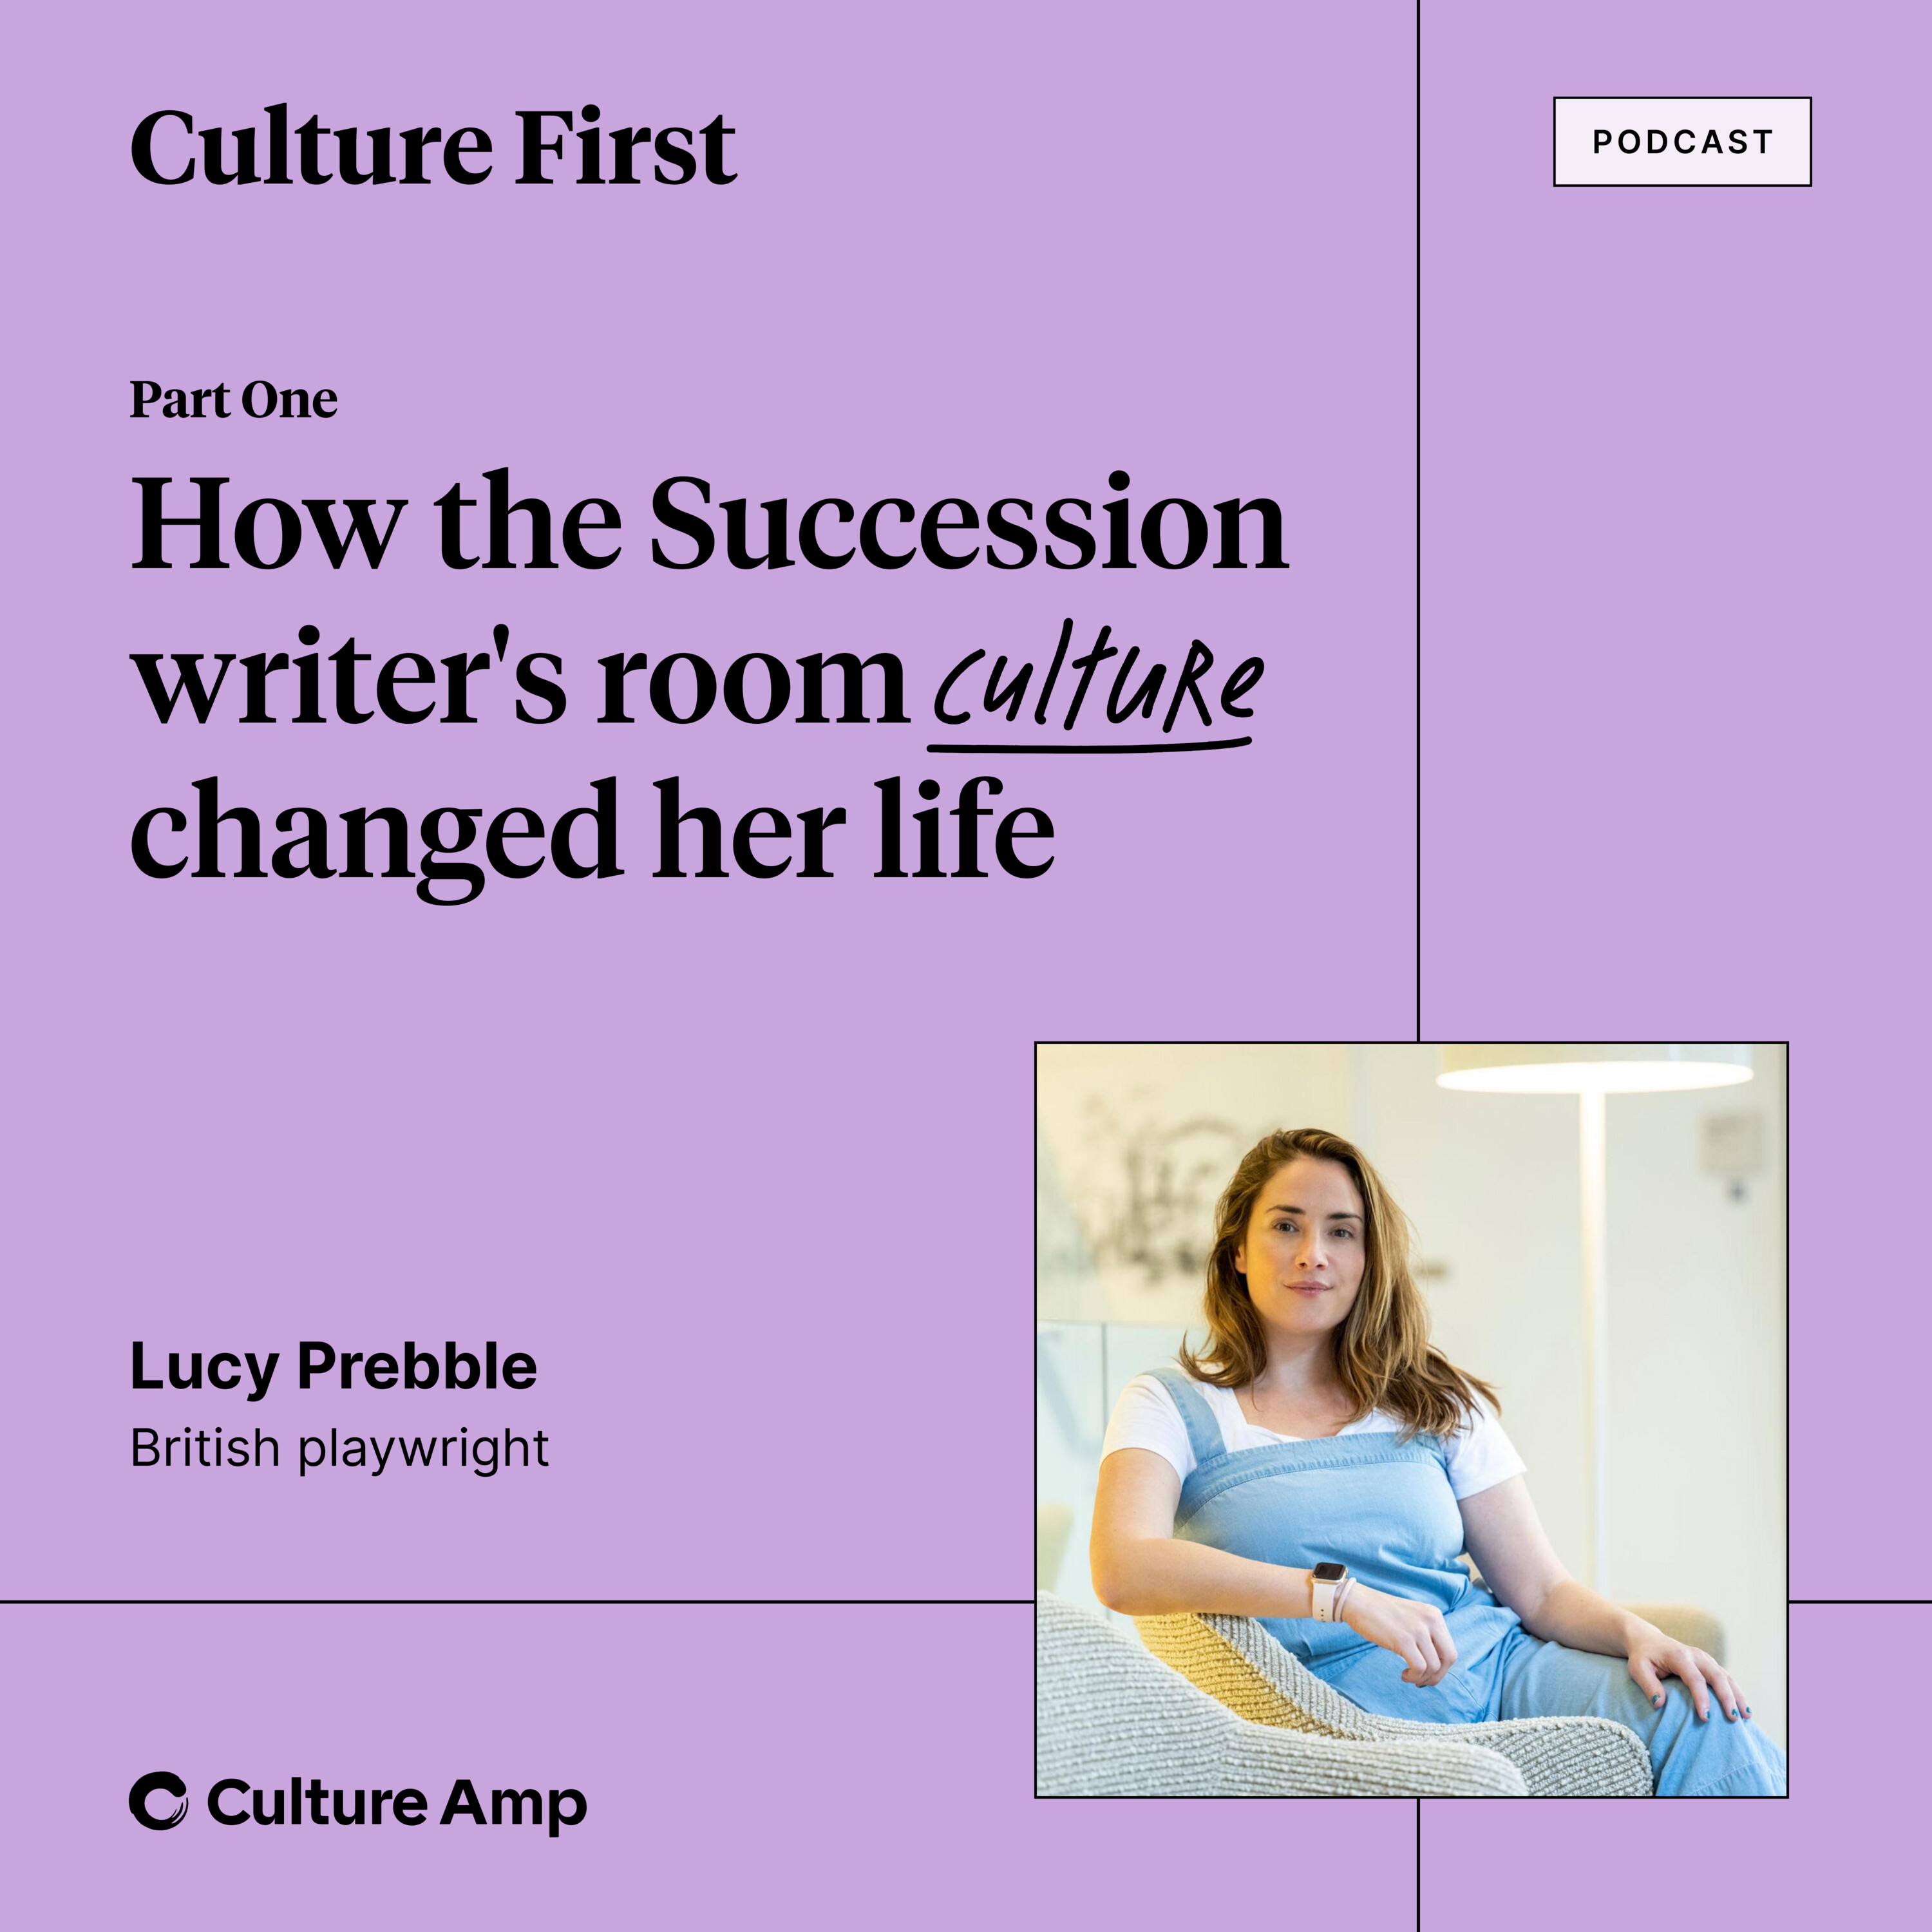 Lucy Prebble: How the Succession writer’s room culture changed her life - Part I